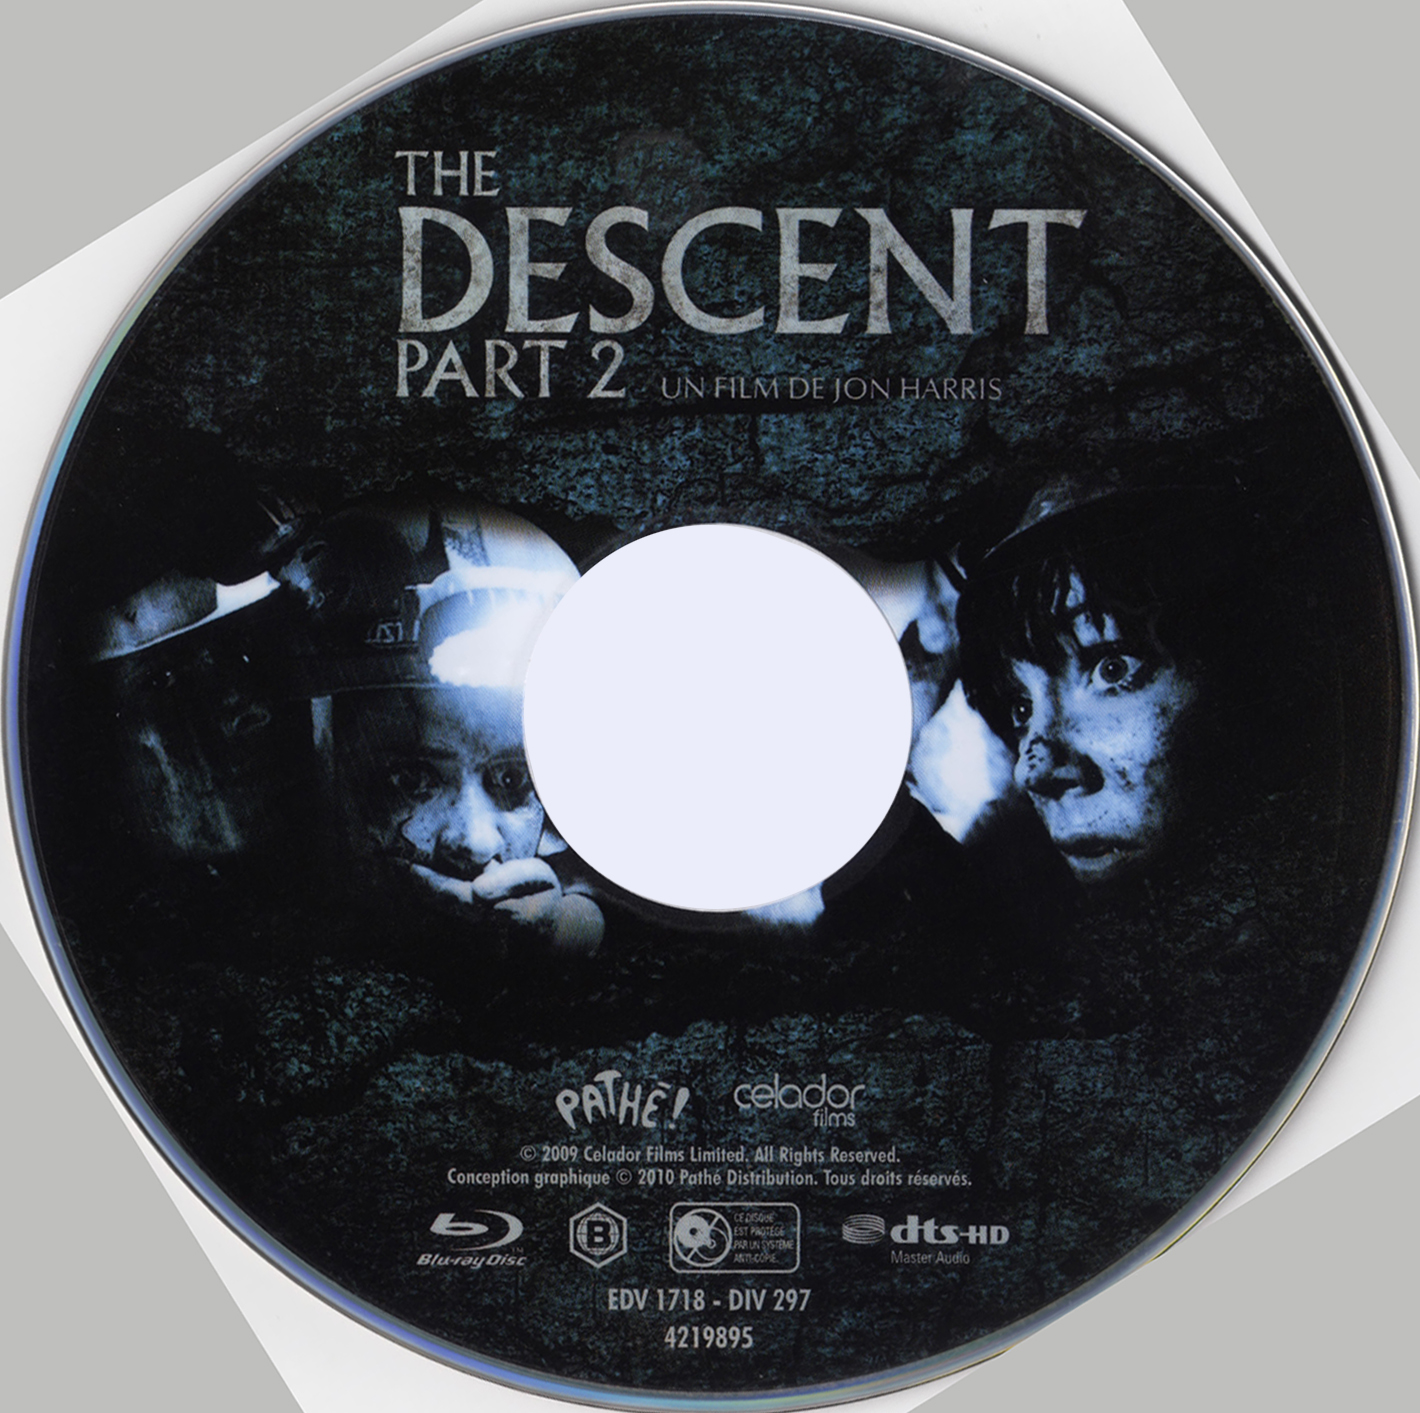 The Descent Part 2 (BLU-RAY)